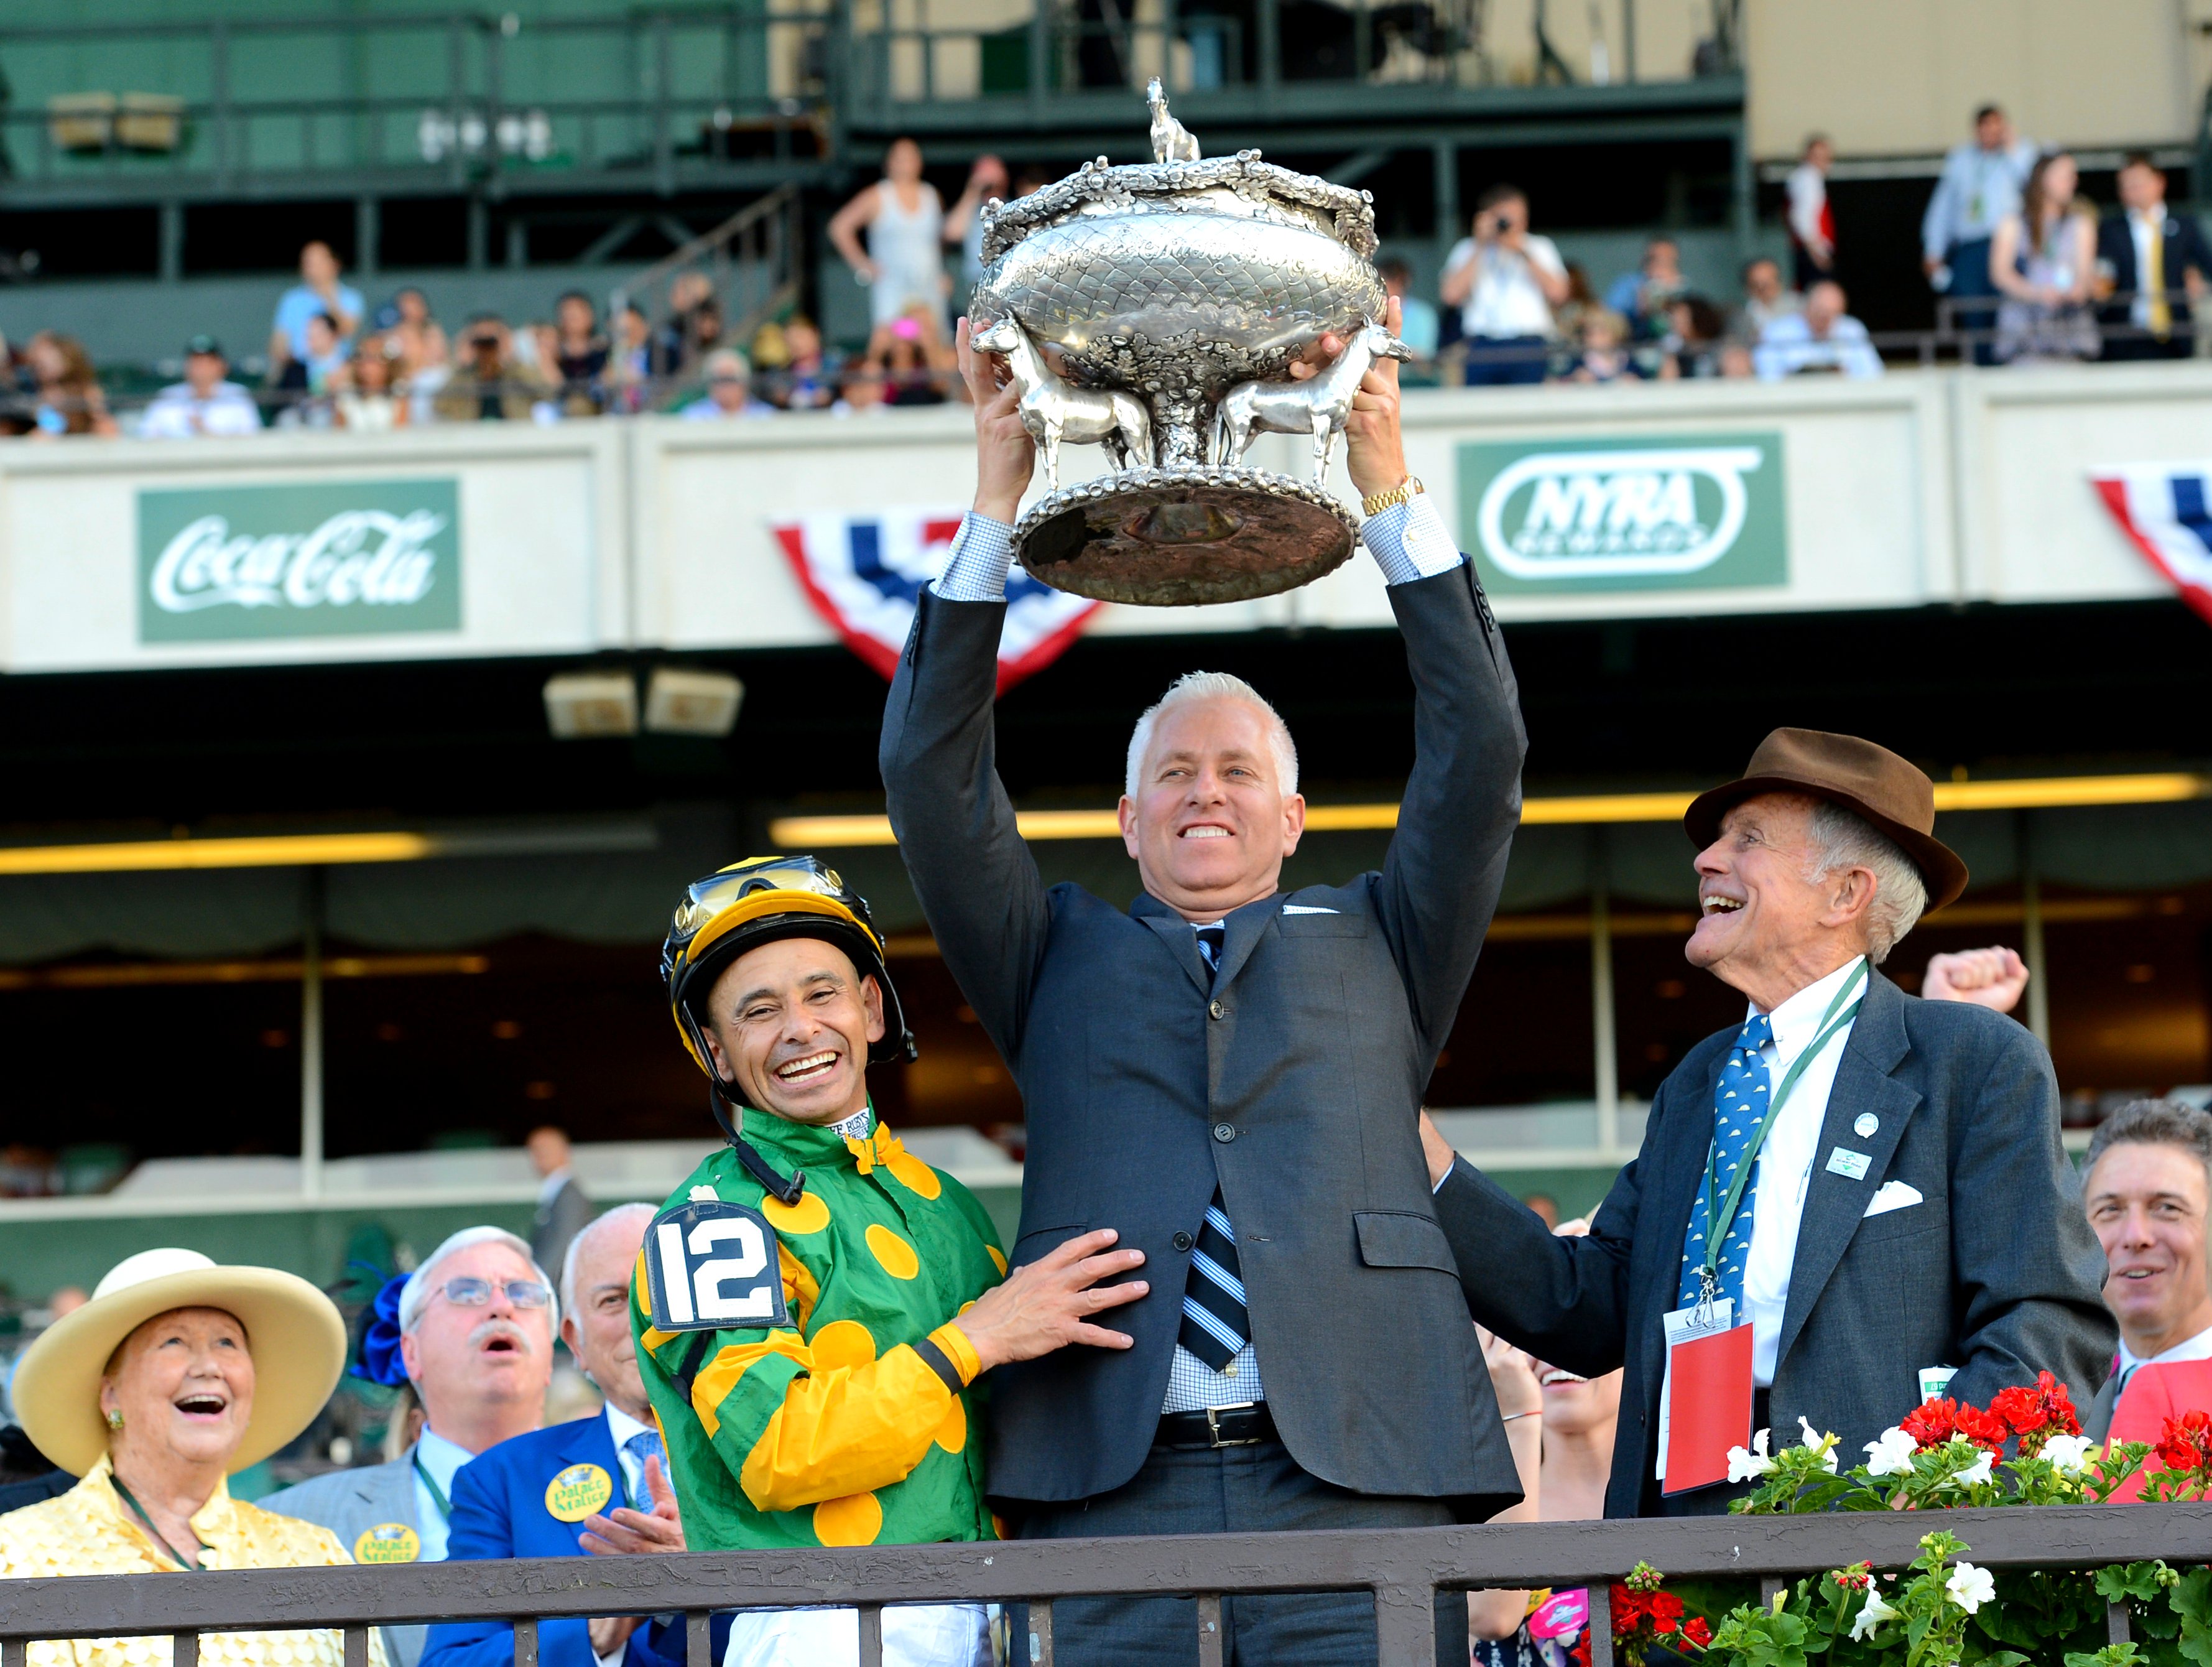 Todd Pletcher celebrates Palace Malice's 2013 Belmont Stakes victory with jockey Mike Smith and Cot Campbell of Dogwood Stable (NYRA)